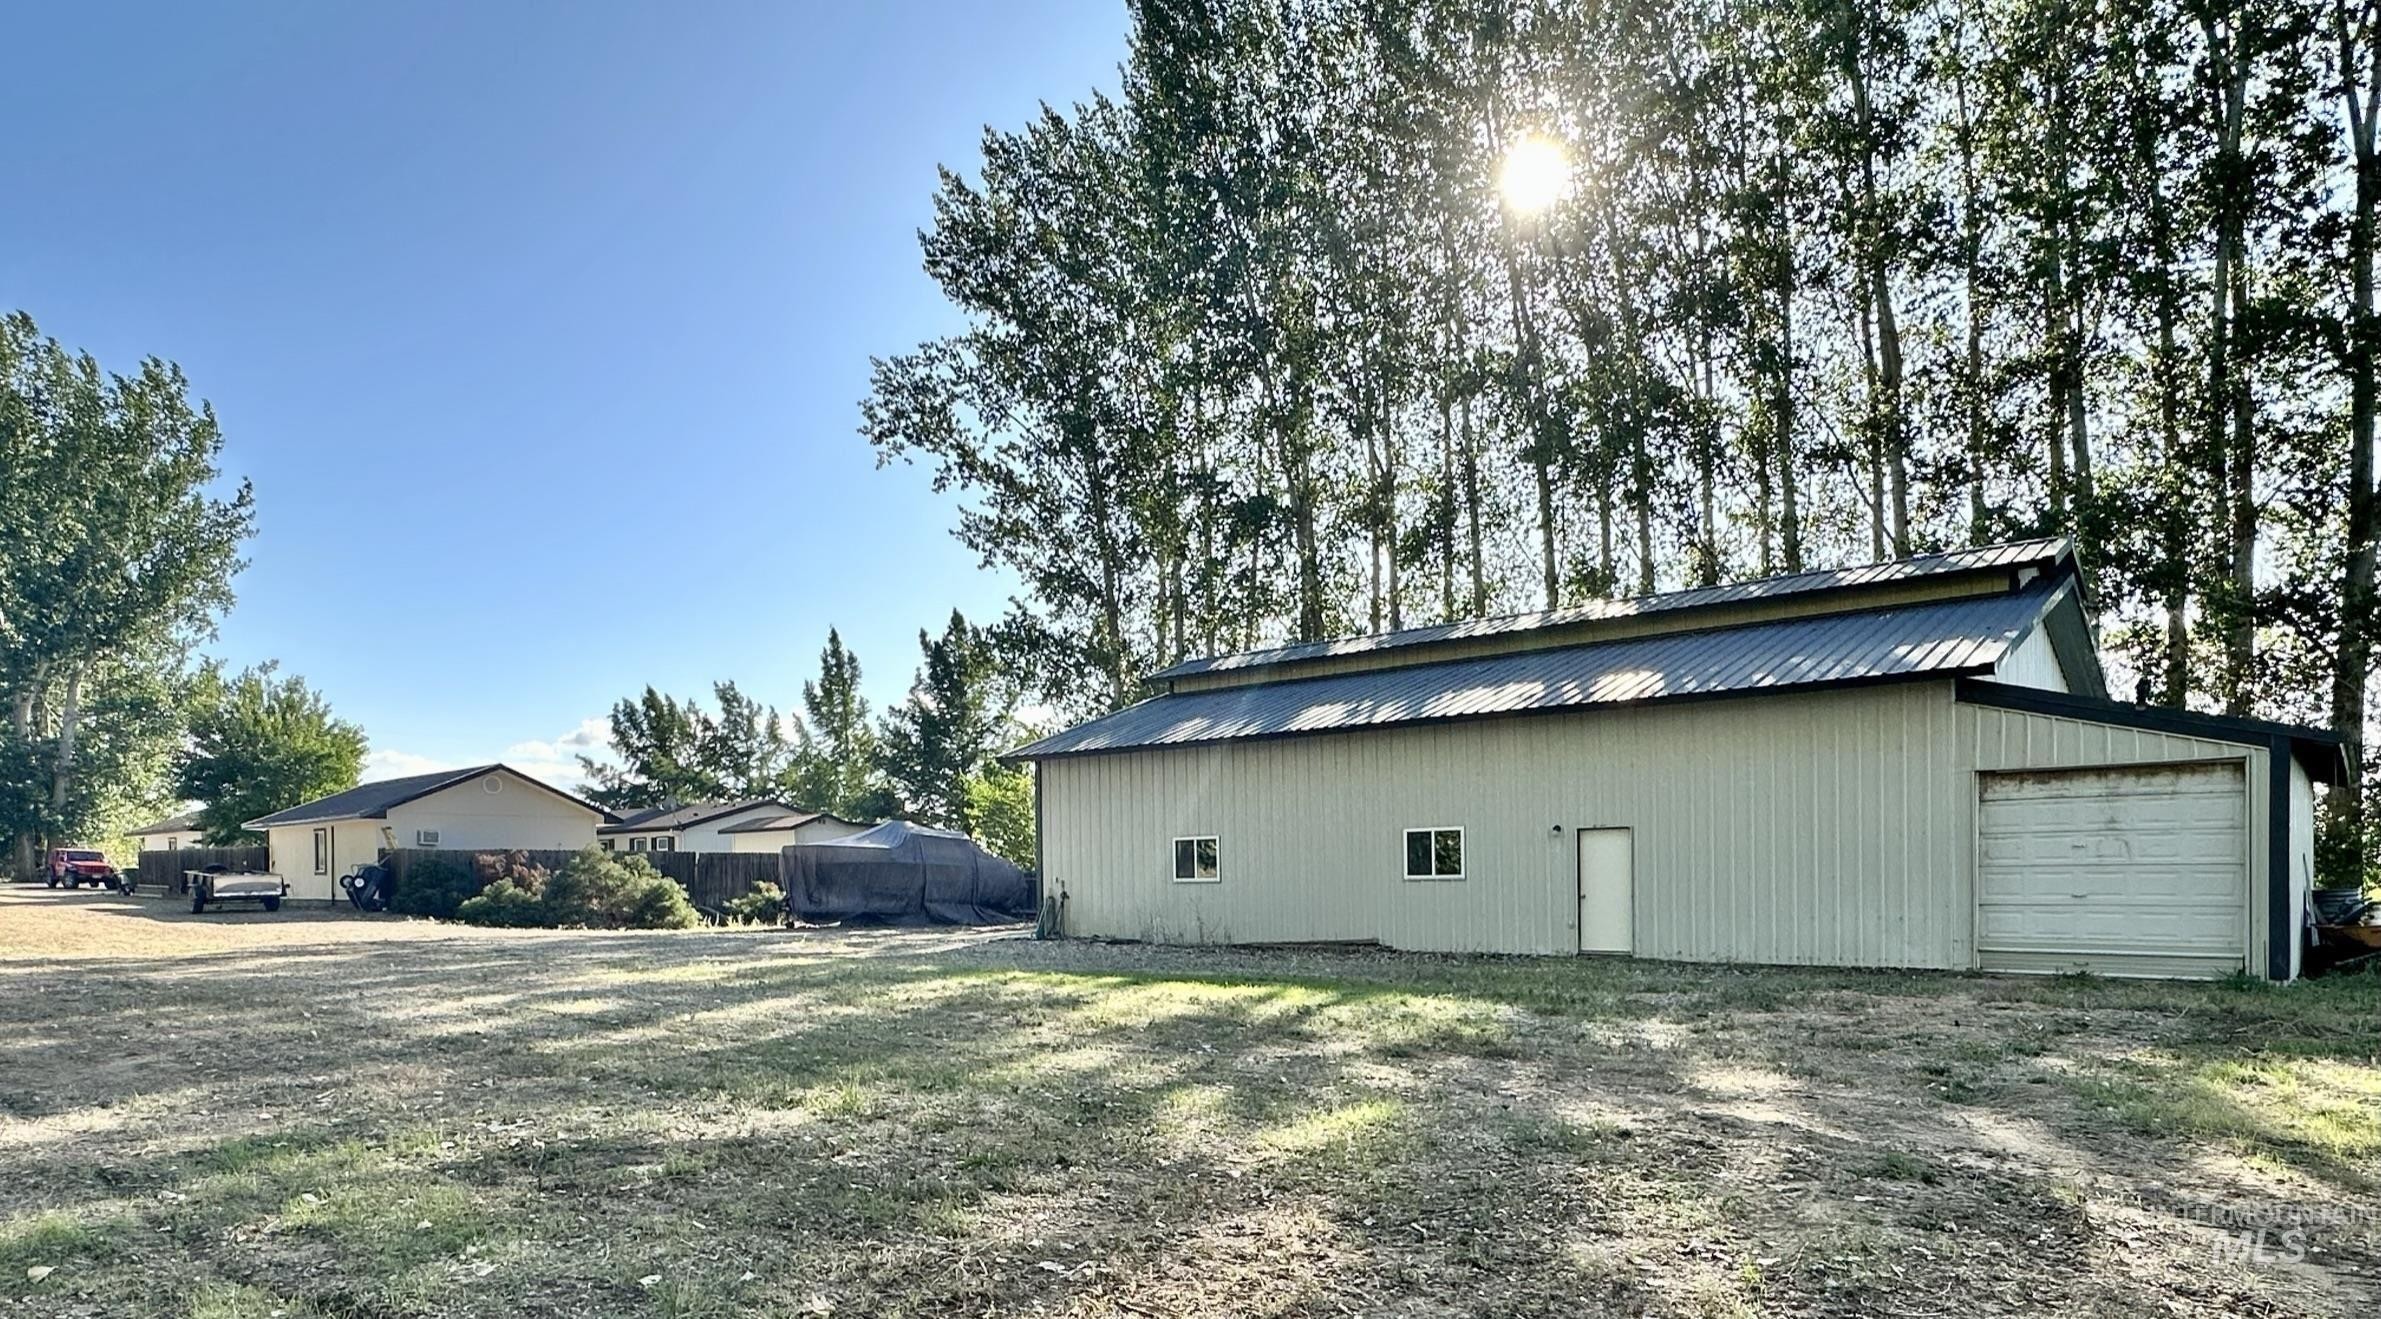 47. 11514 Payette Heights Road